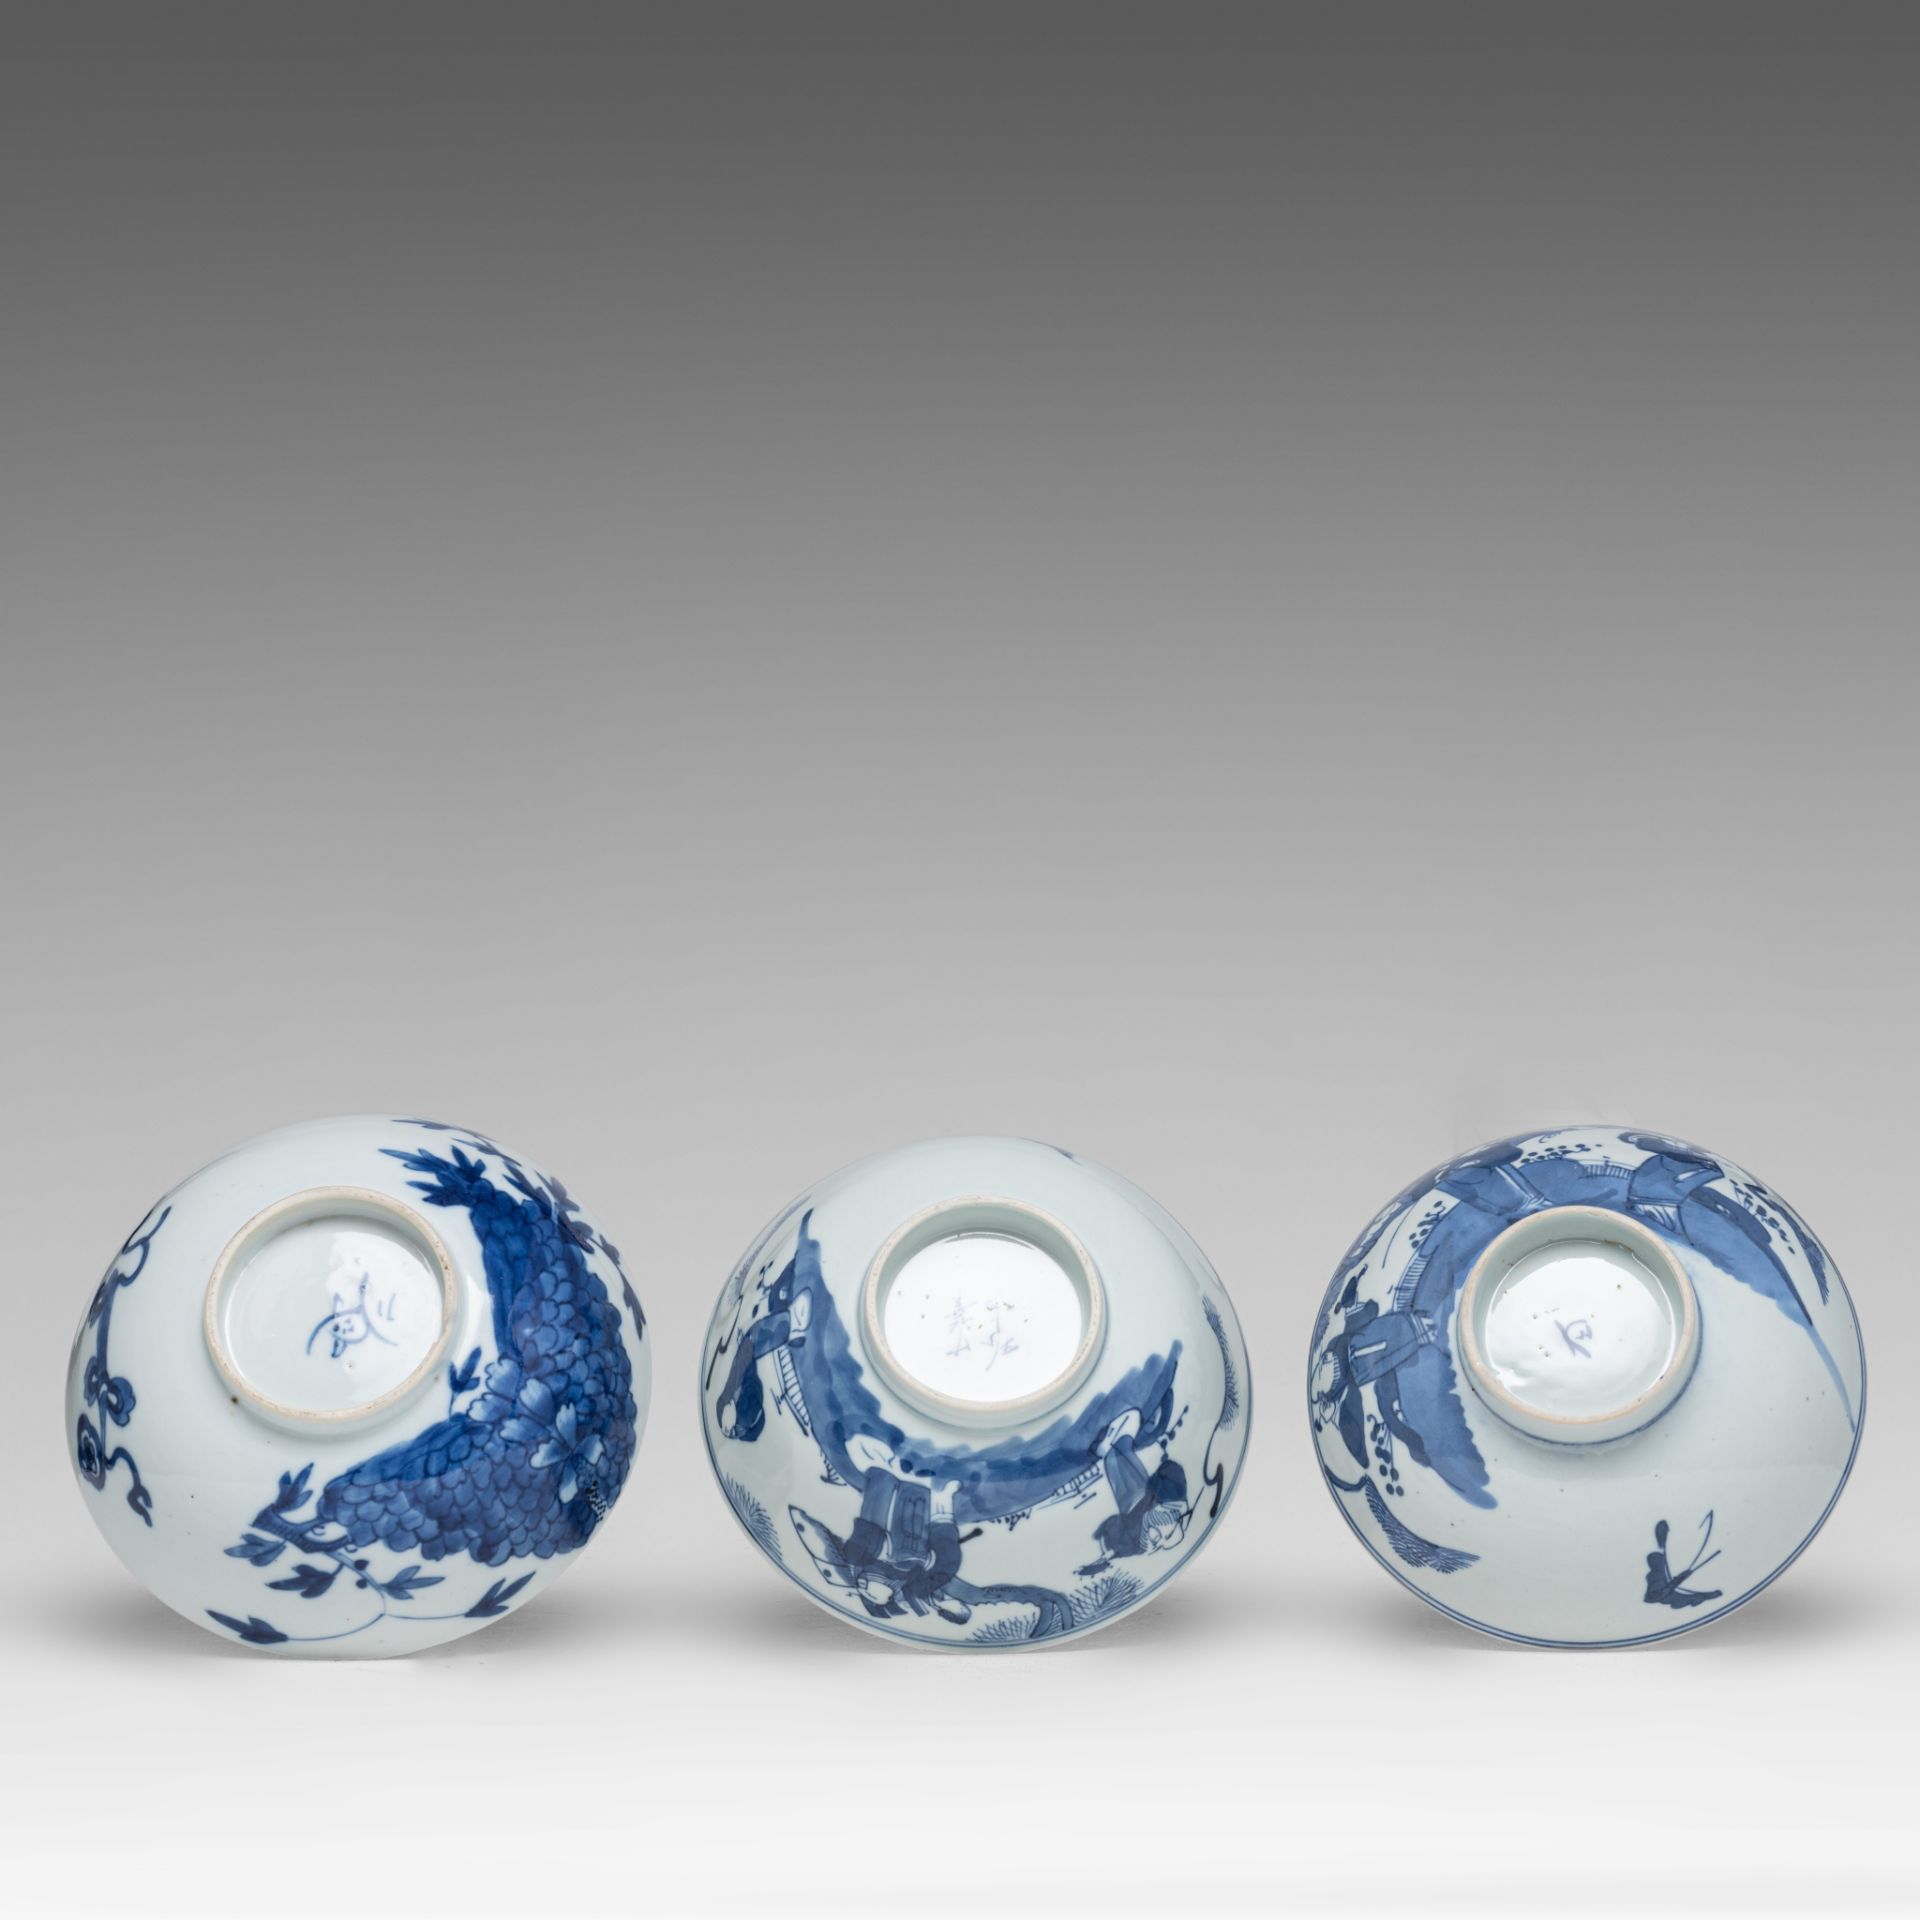 A collection of Chinese blue and white bowls and a pair of celadon vases, late 19thC/Republic period - Image 18 of 19